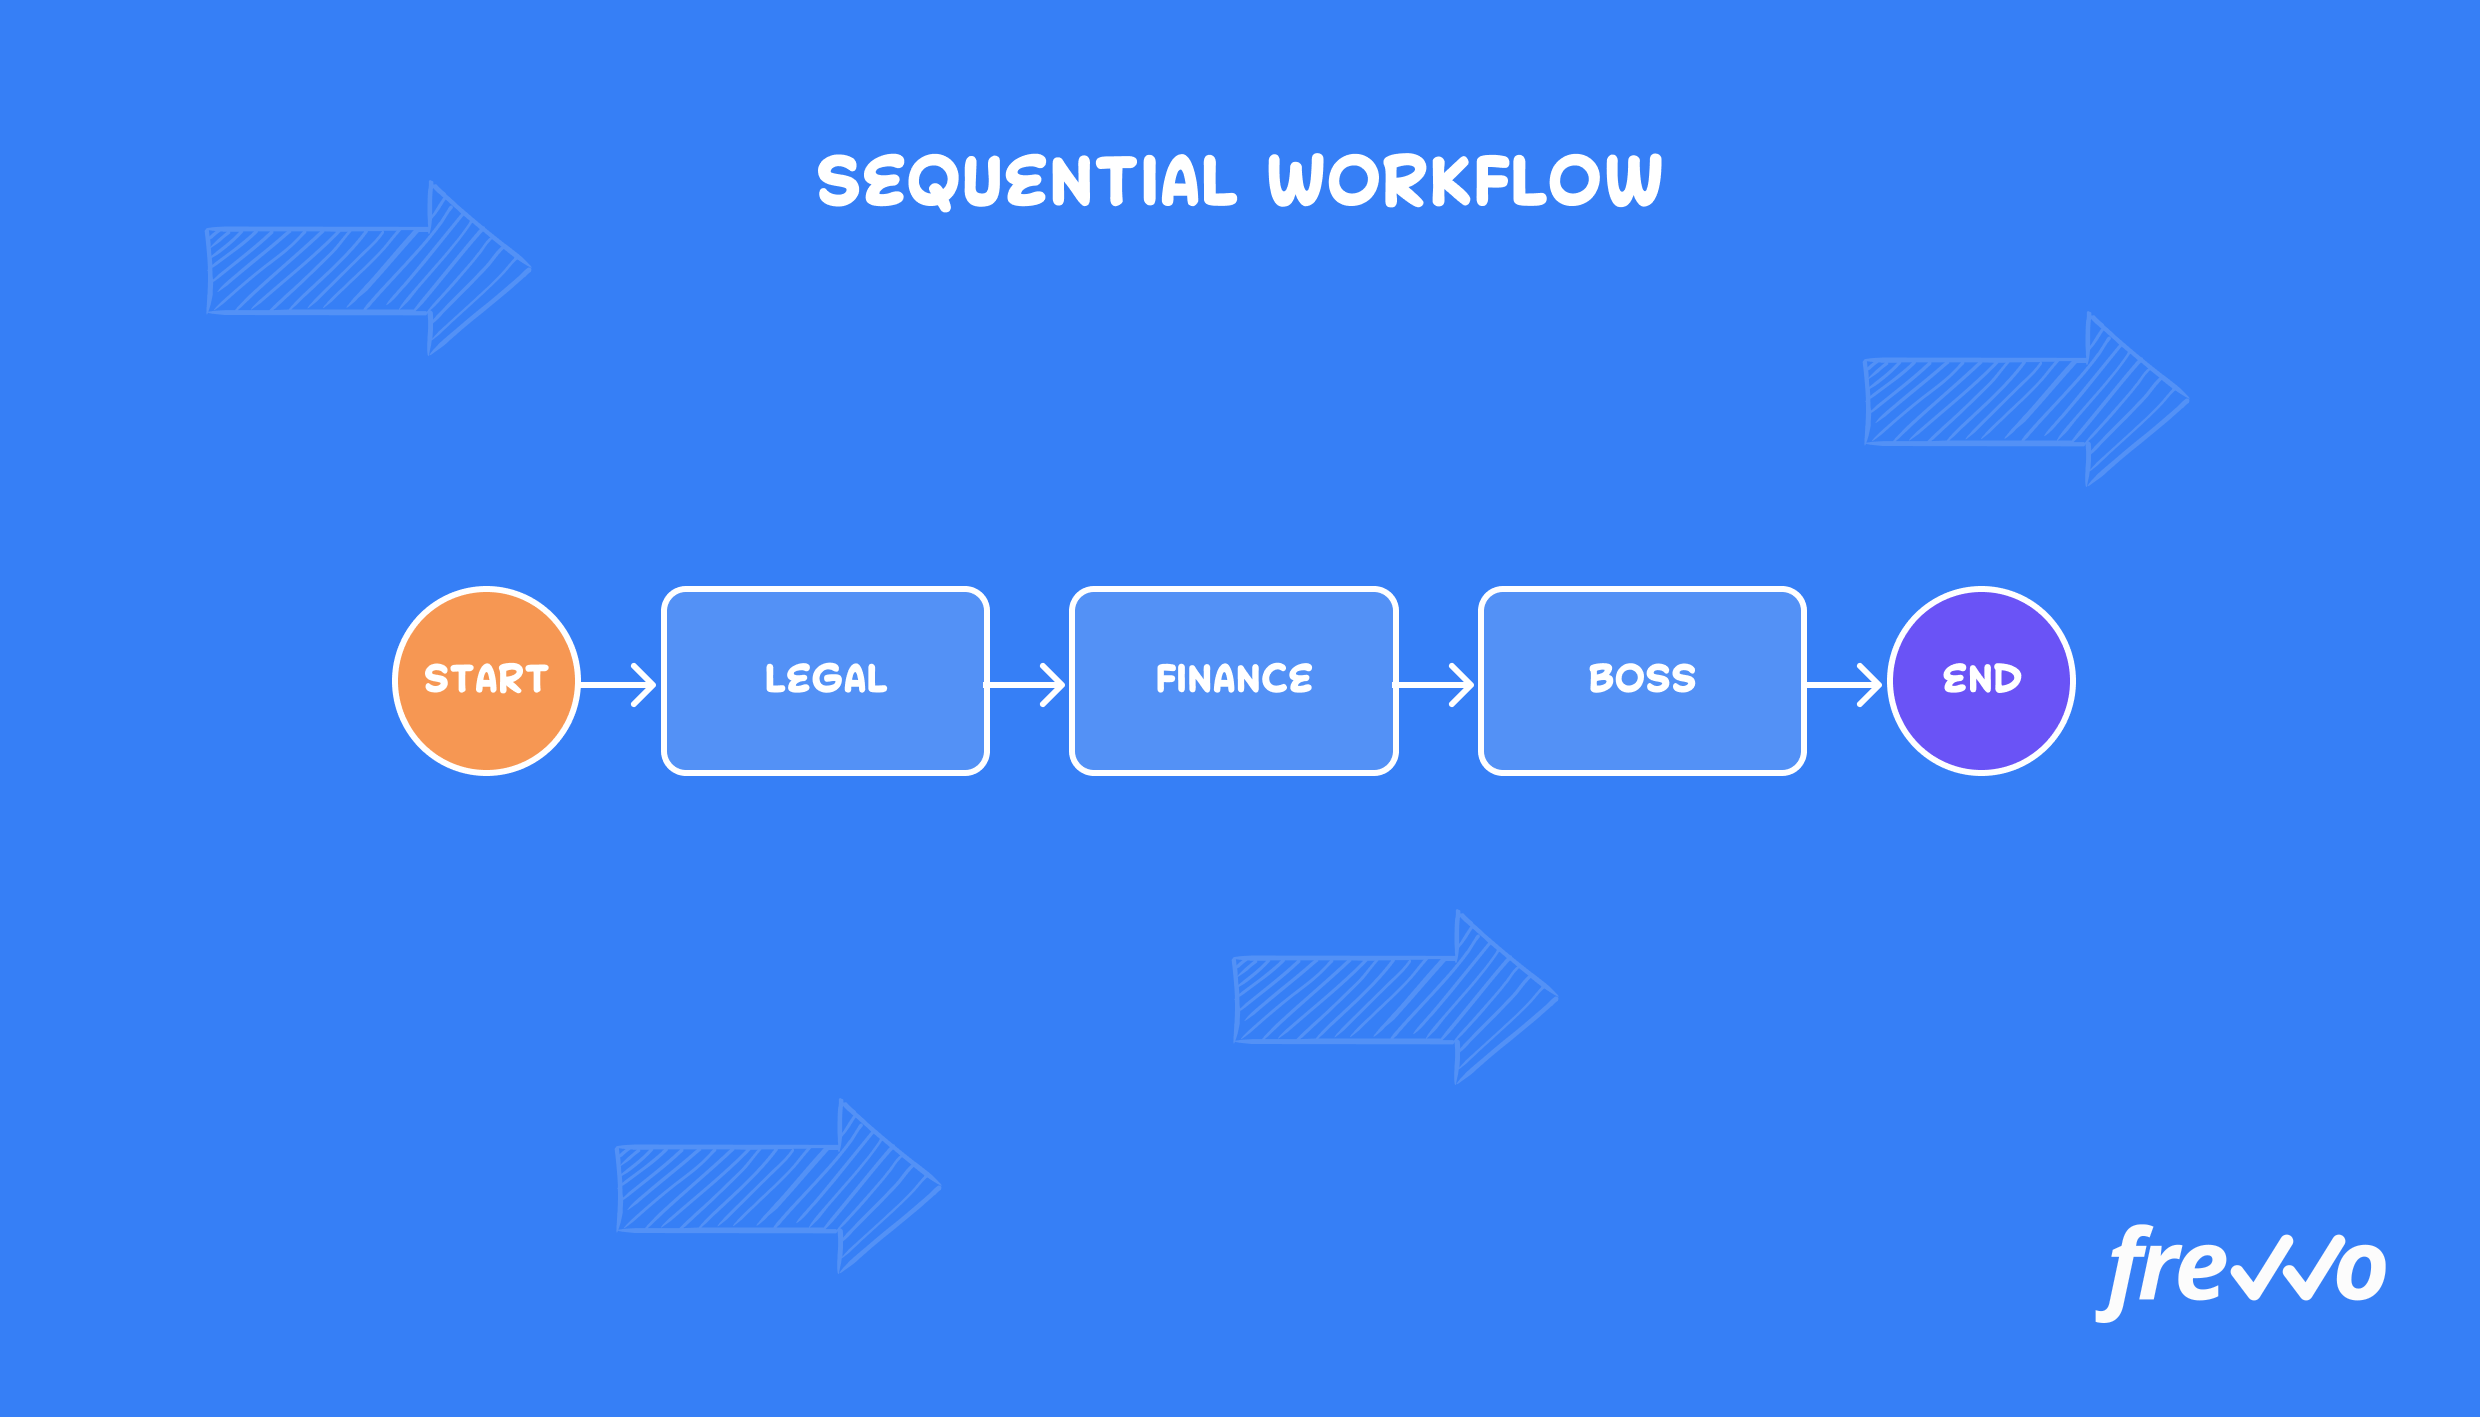 Sequential workflow example